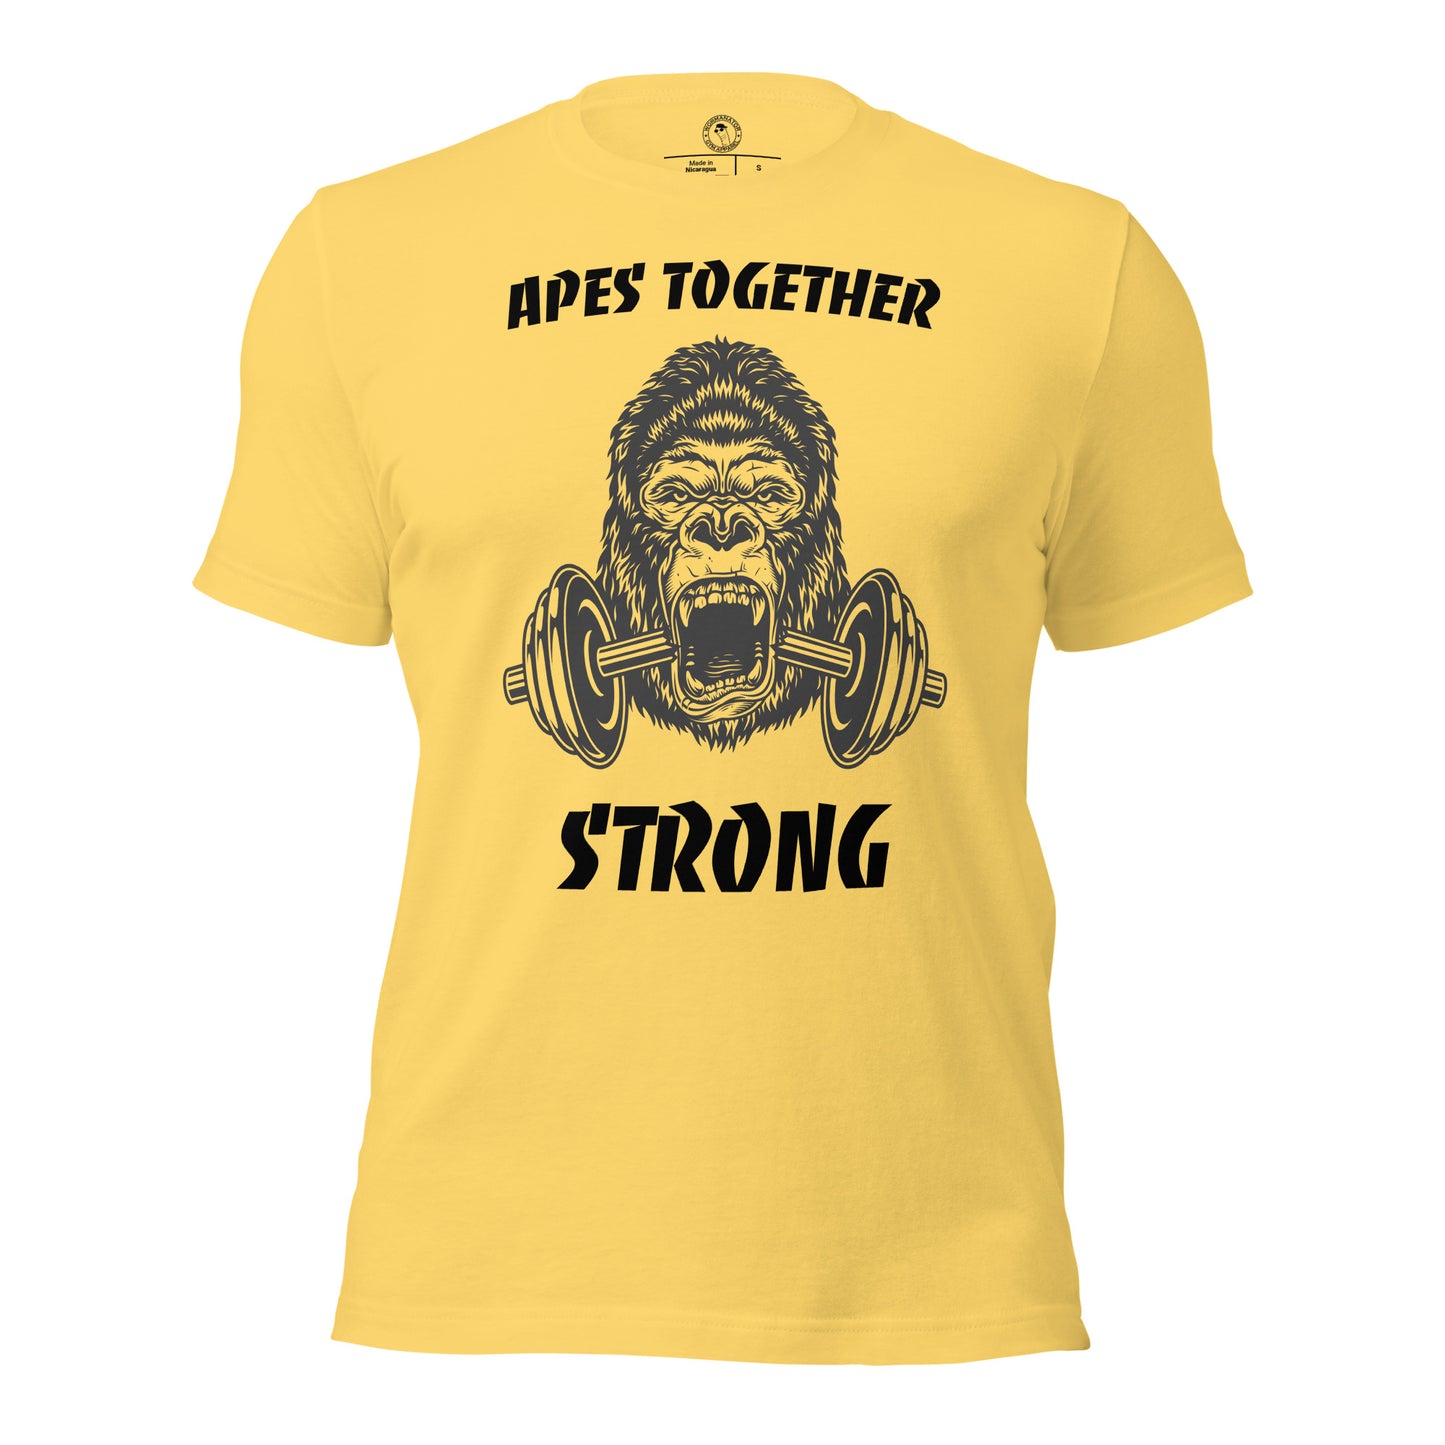 Apes Together Strong Shirt in Yellow